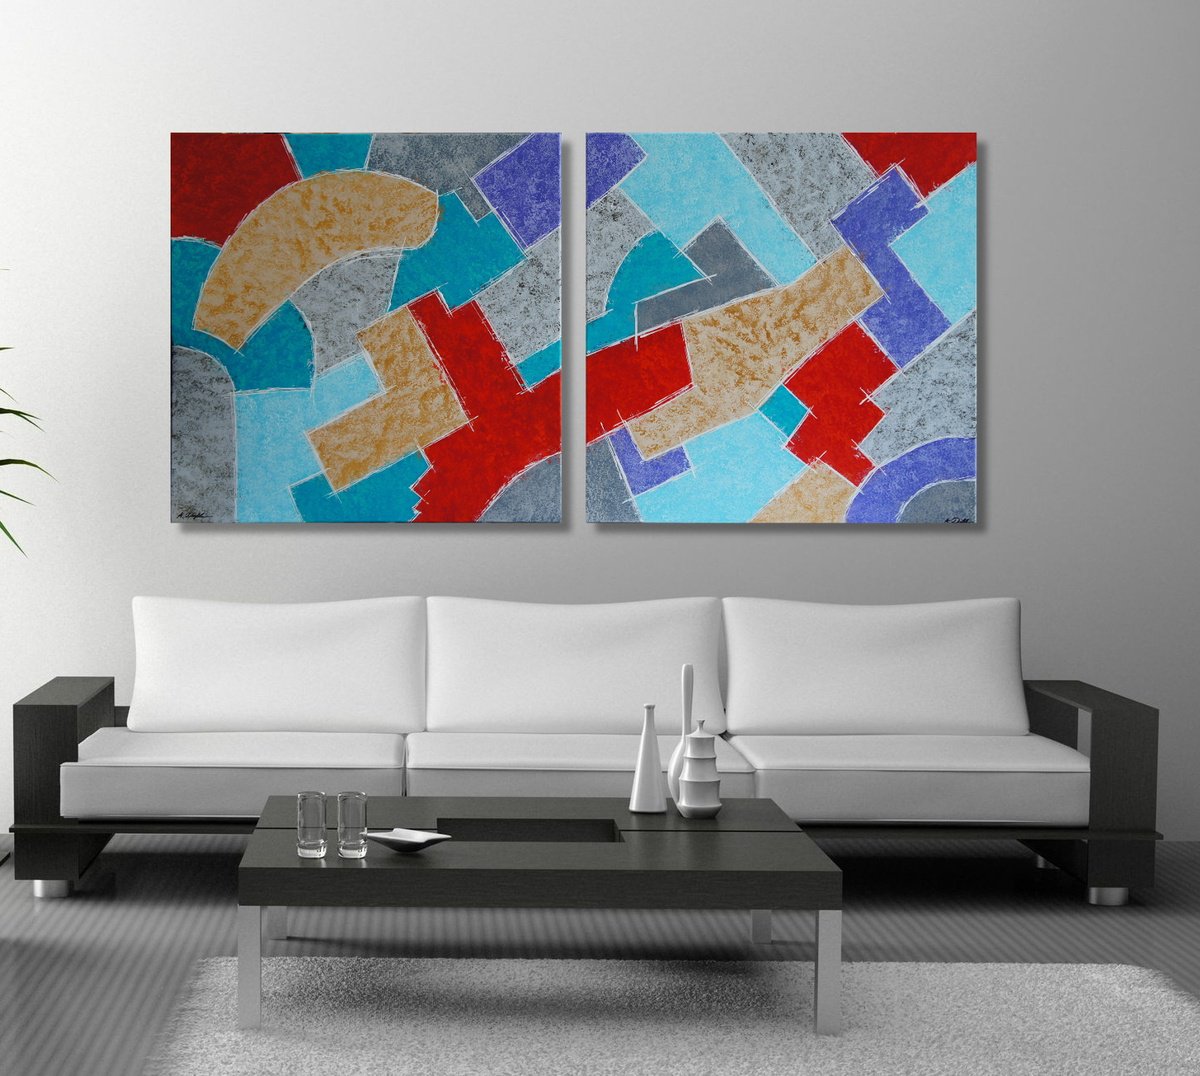 Perfectly Imperfect (165 x 80 cm) XXL (66 x 32 inches) Diptych by Ansgar Dressler